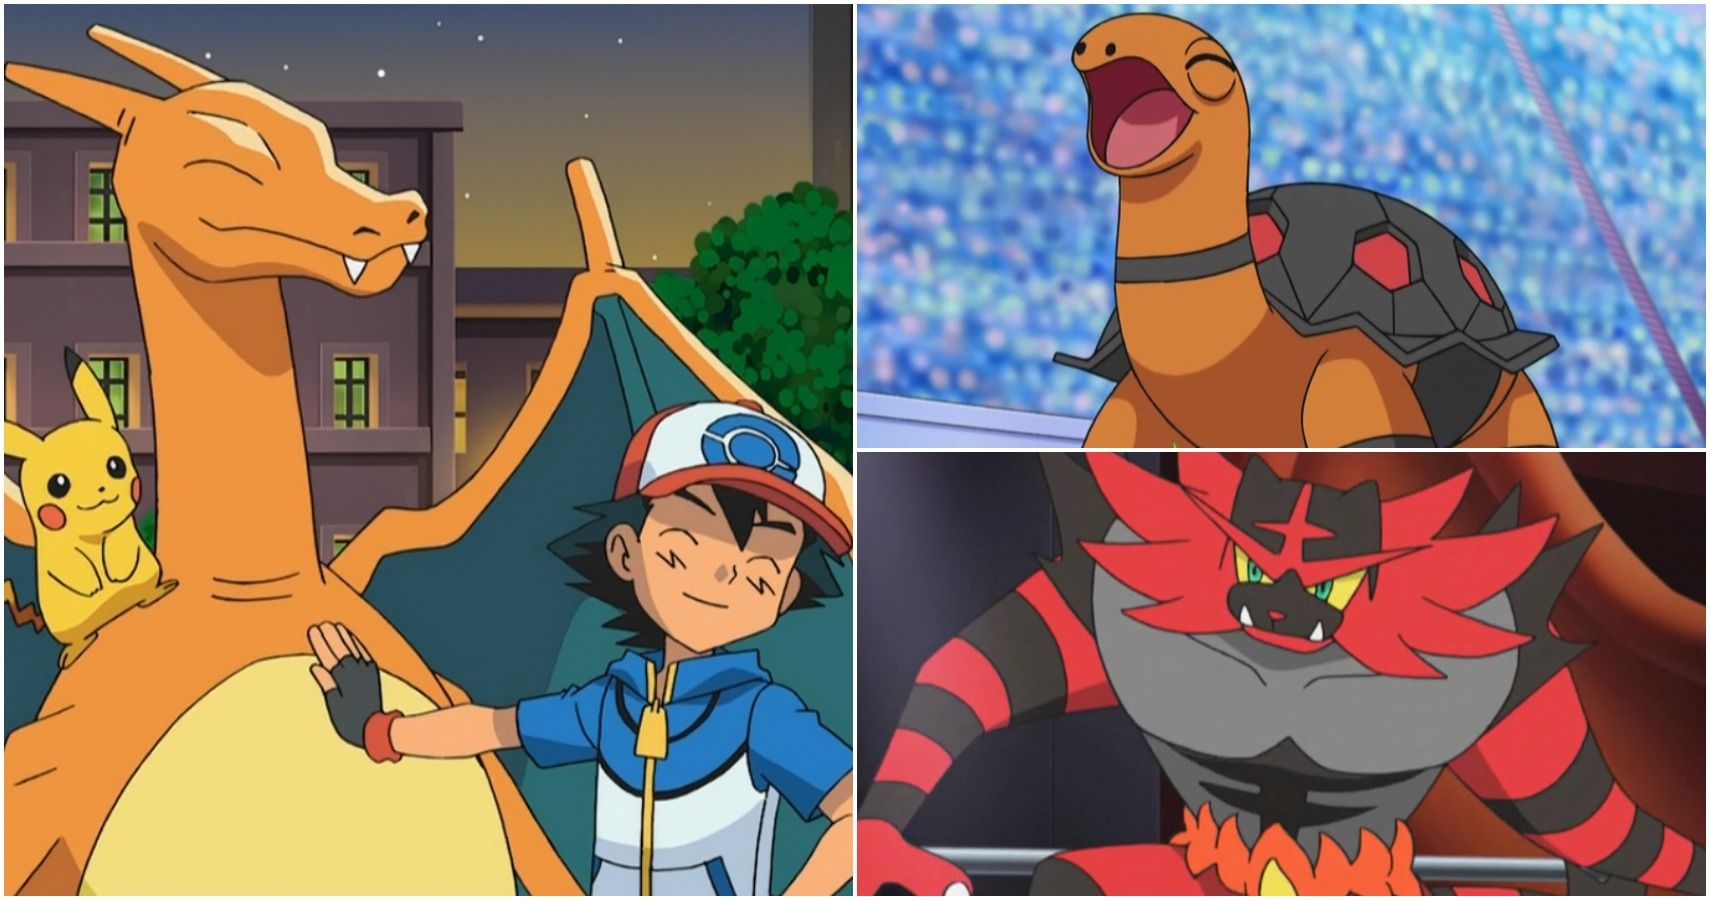 every-fire-type-pokemon-ash-ketchum-has-caught-so-far-ranked